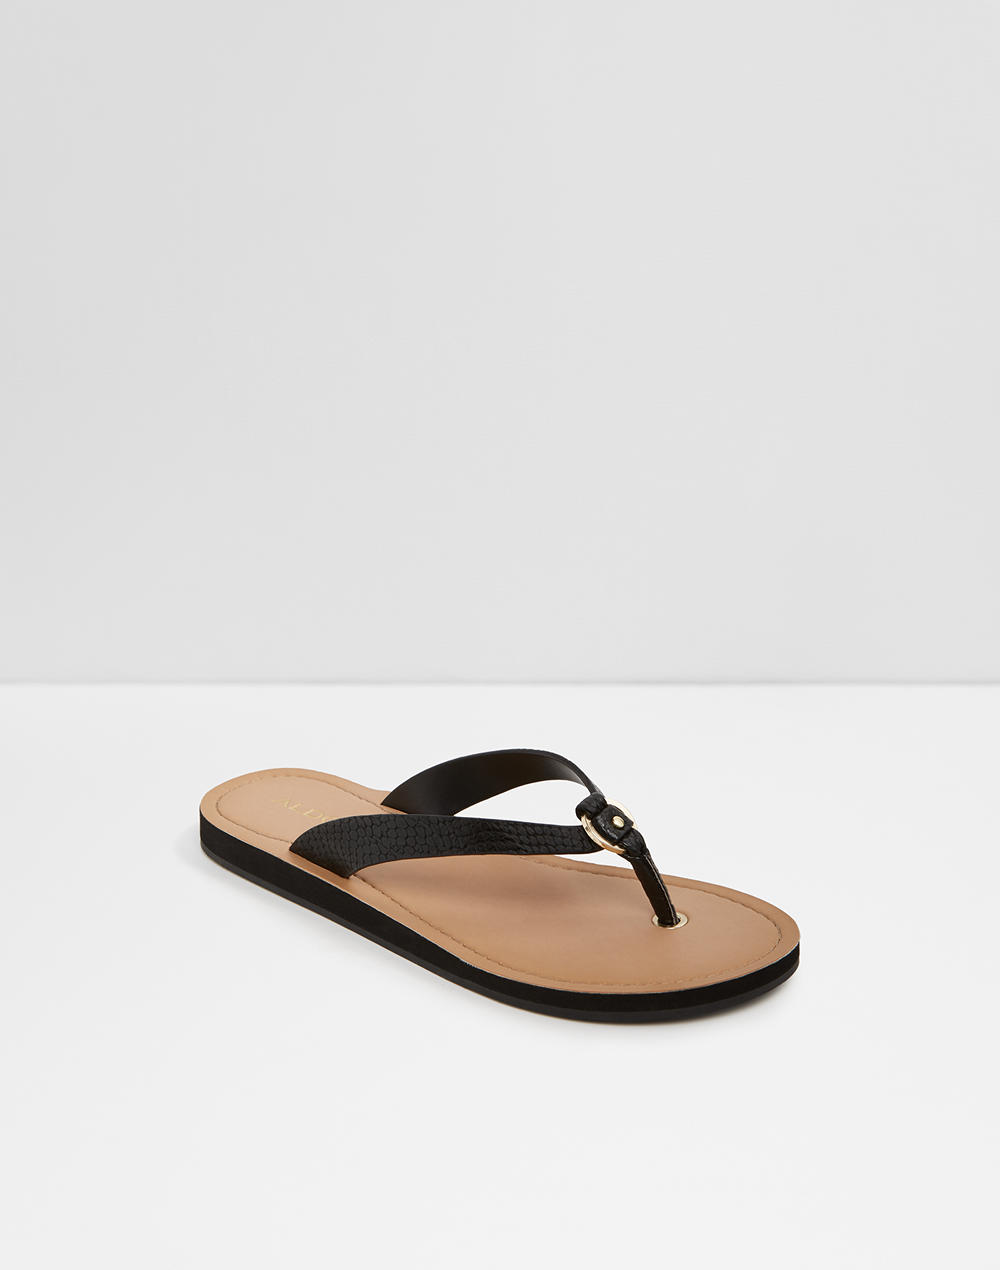 Clearance sandals for women | ALDO Canada